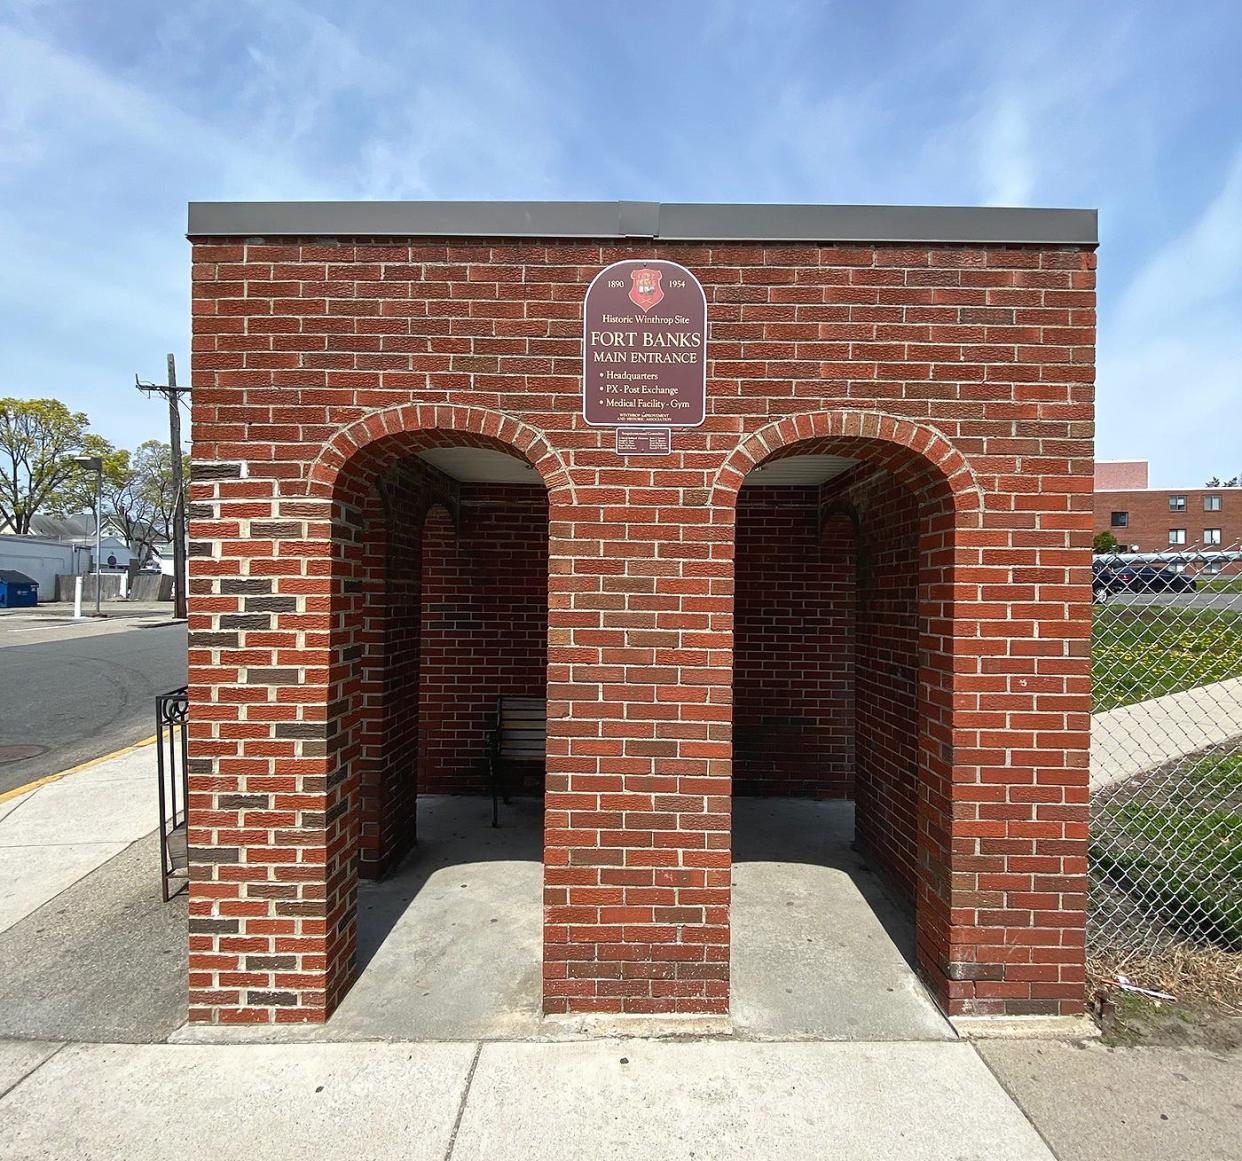 The entrance to Fort Banks in Winthrop, Mass., a National Historic site; today the site of the Governor's Park condominium complex.